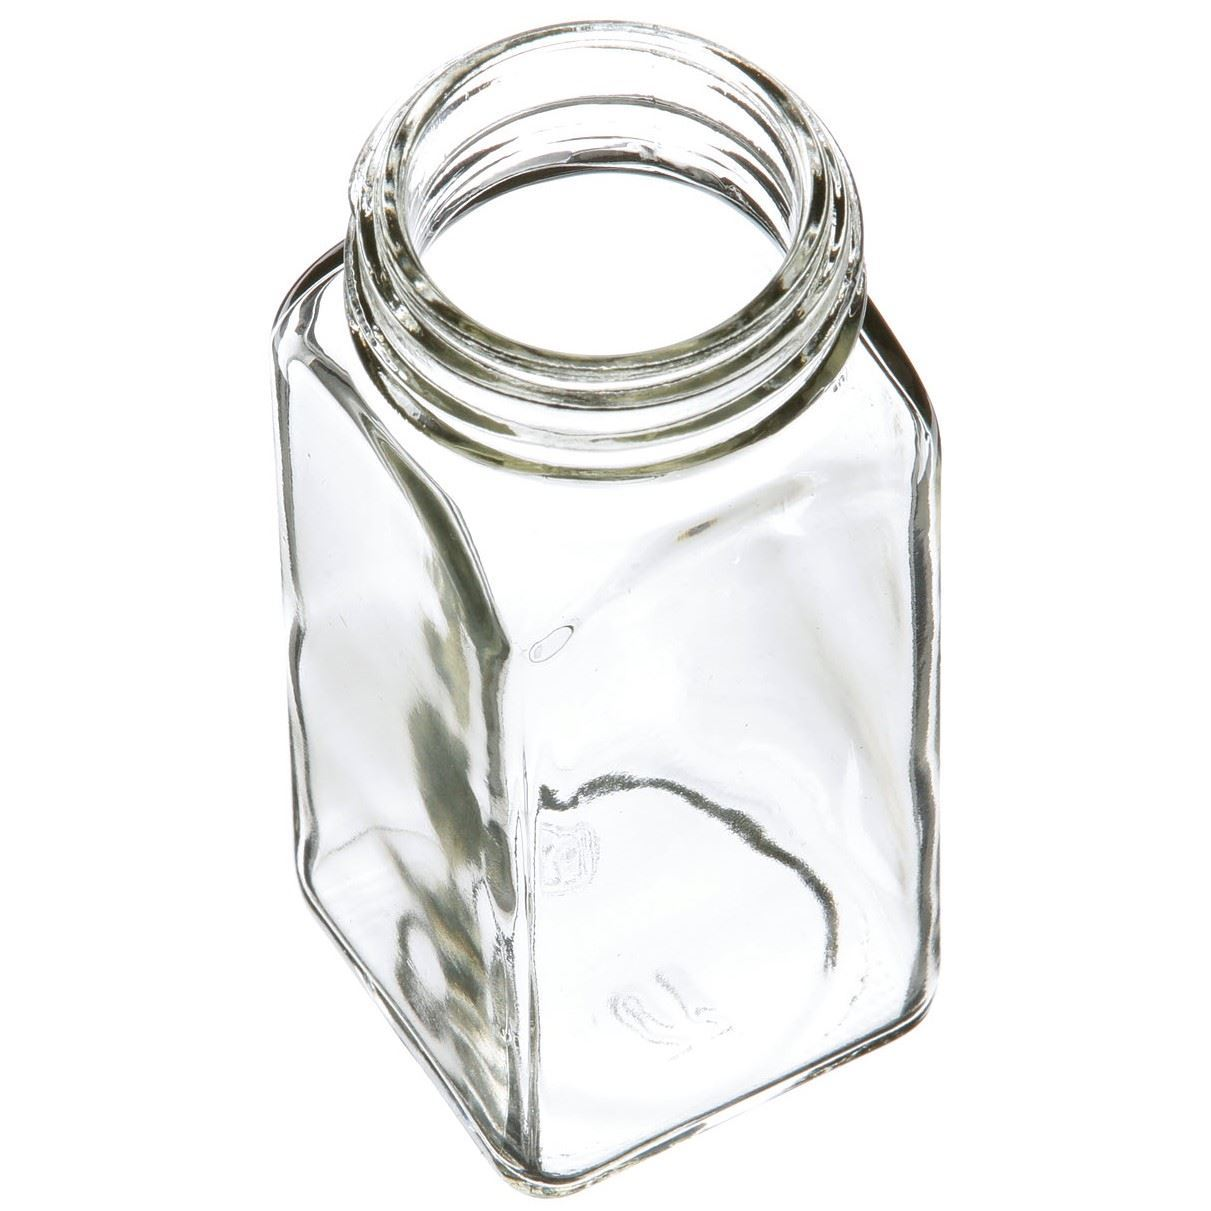 4Oz 120Ml Tiny Clear Spice Jars Bottle Container Square Glass Spice Jar  With Silver Lid - Buy 4Oz 120Ml Tiny Clear Spice Jars Bottle Container Square  Glass Spice Jar With Silver Lid